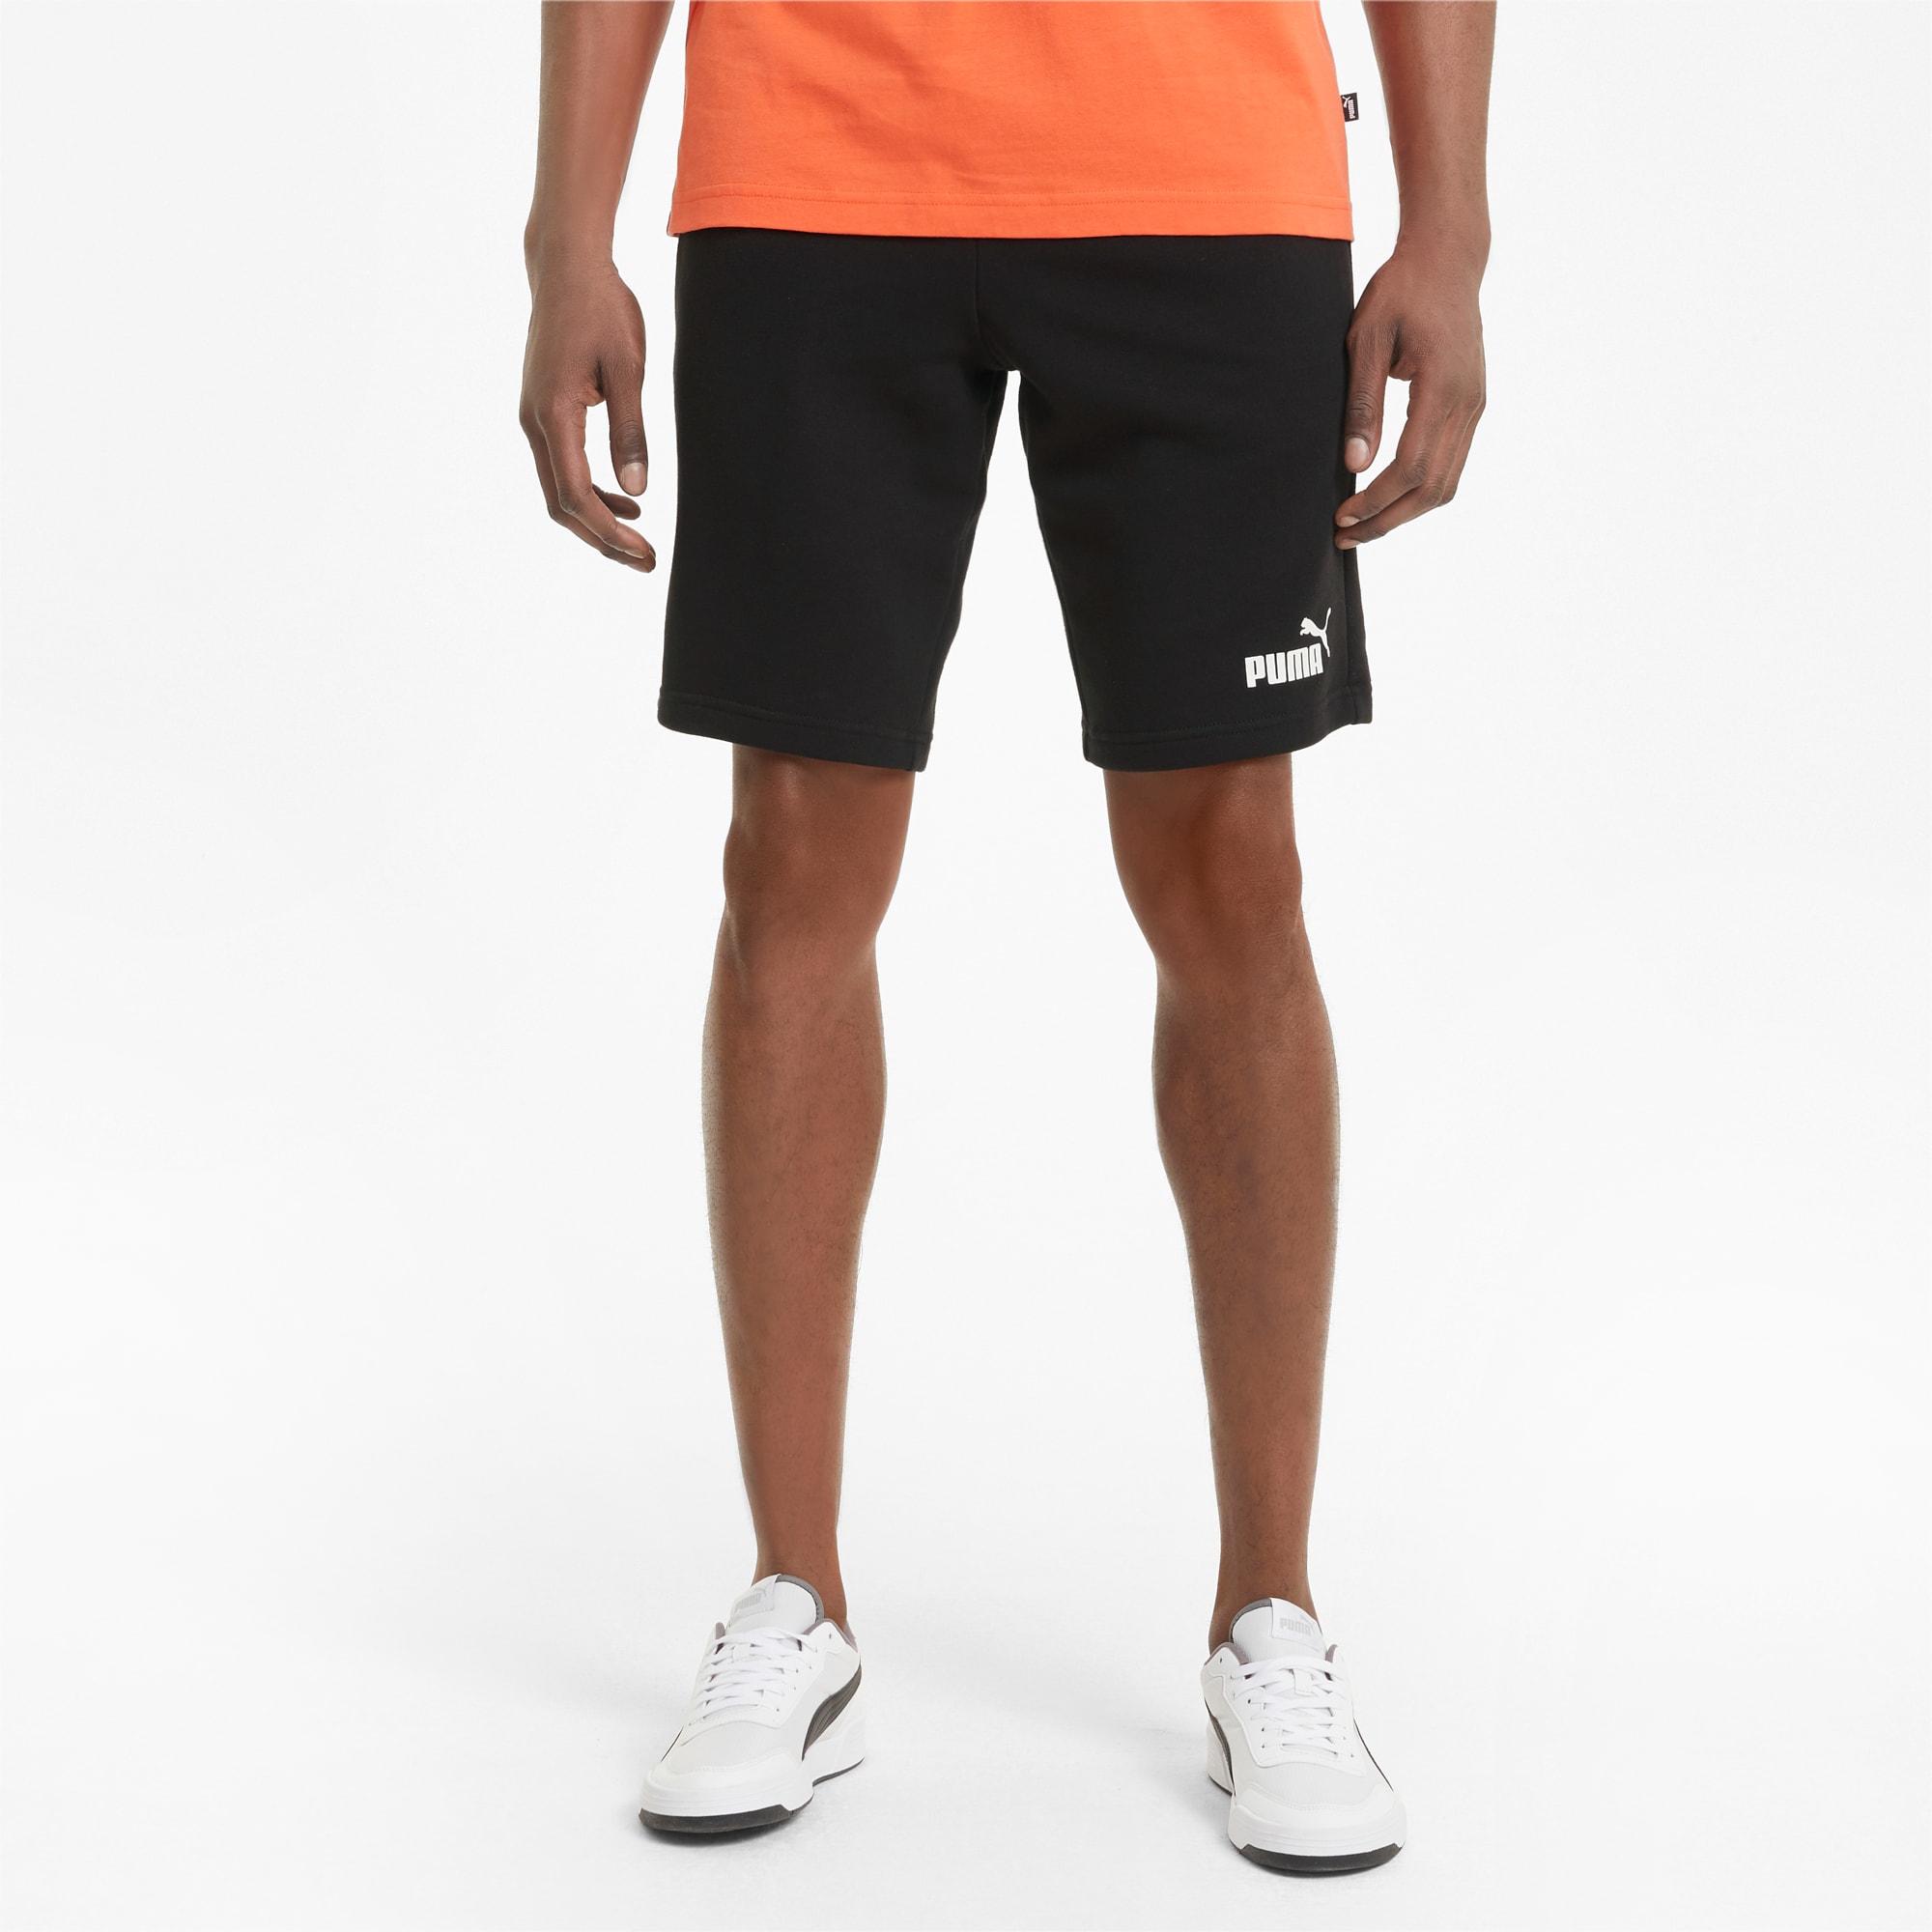  adidas Mens Shorts Essentials 3 Stripe Shorts Woven 3 Stripe  Gym Running Shorts (S, Black) : Clothing, Shoes & Jewelry